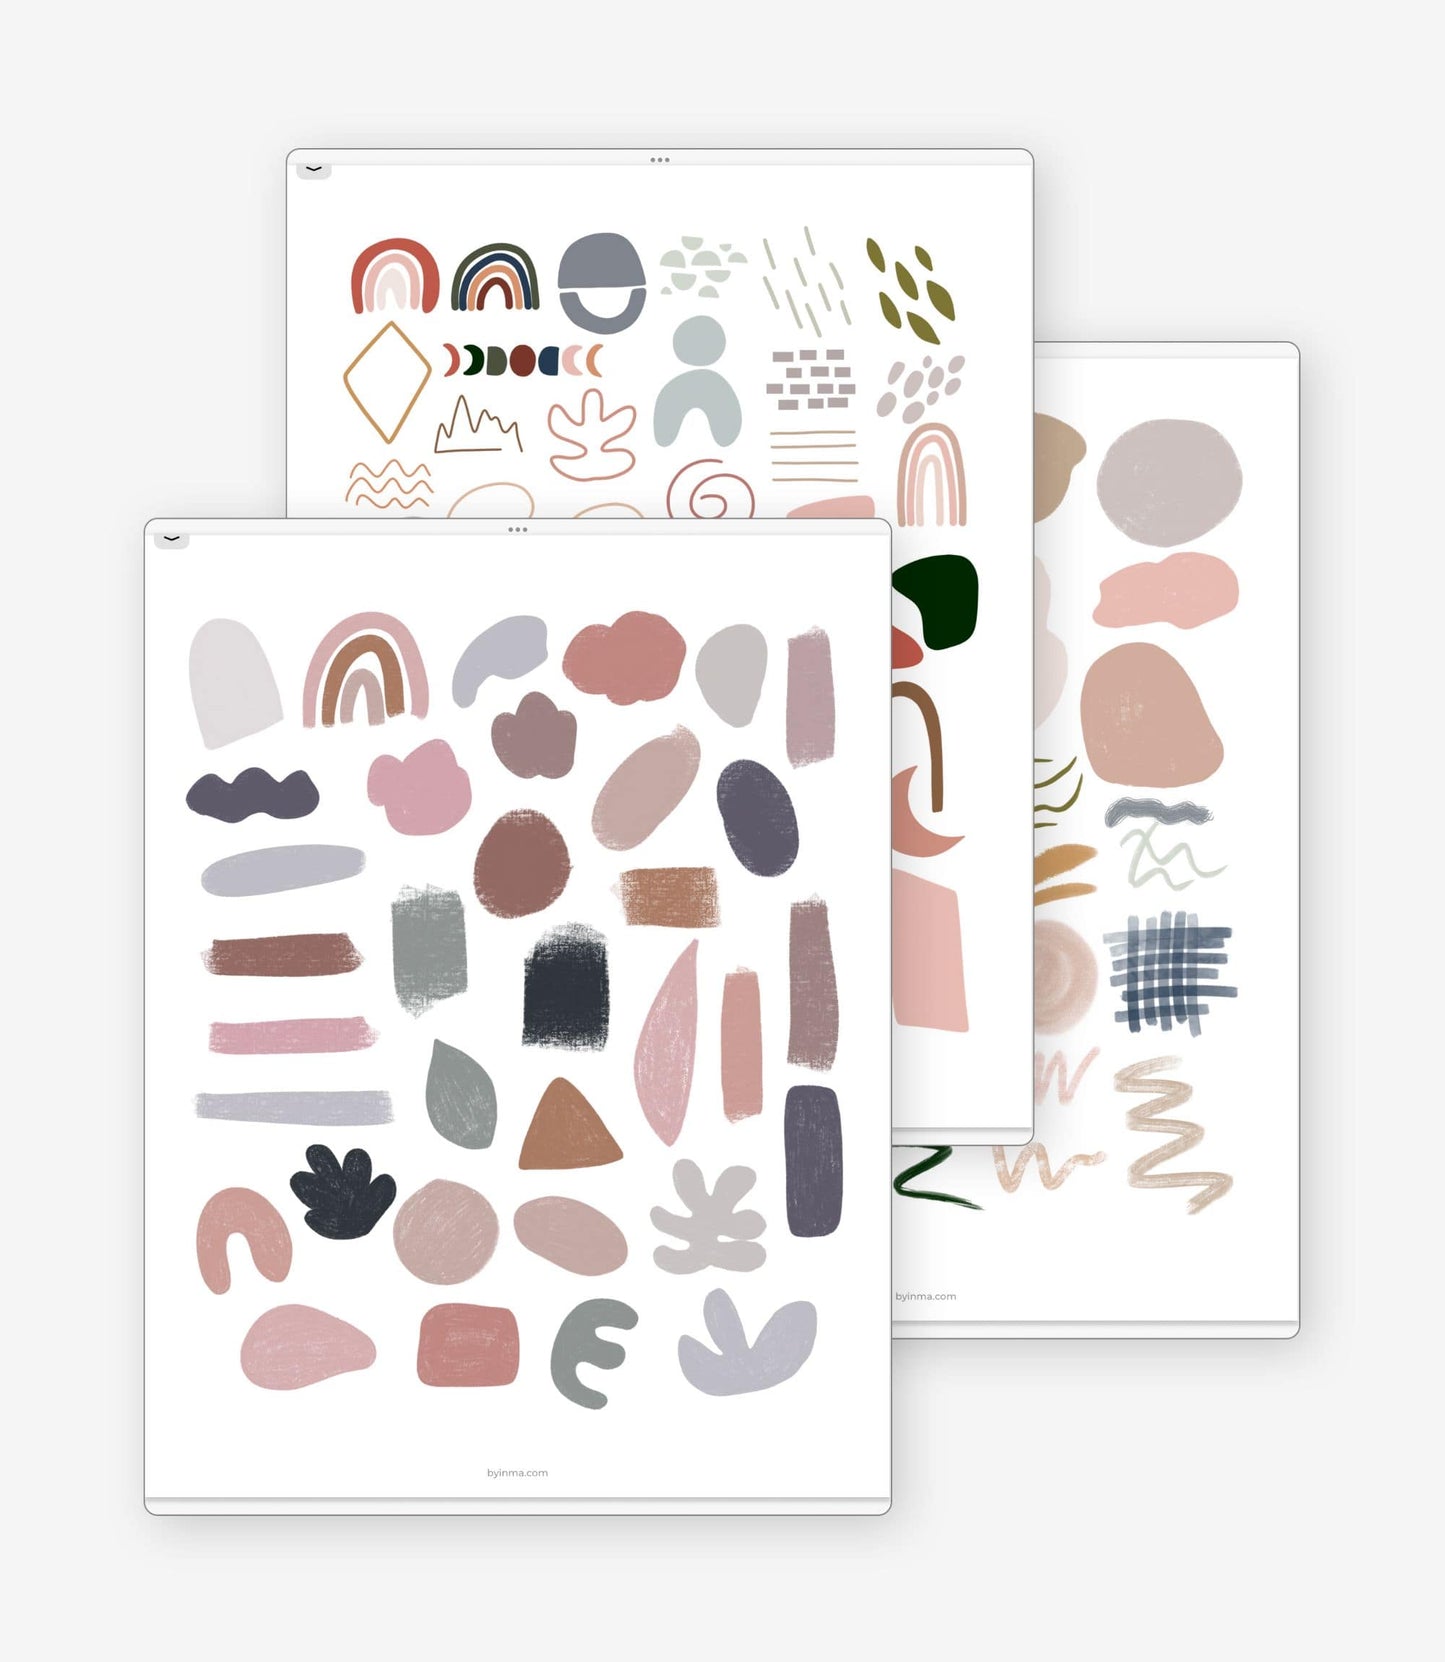 Digital stickers - Aesthetic abstract shapes